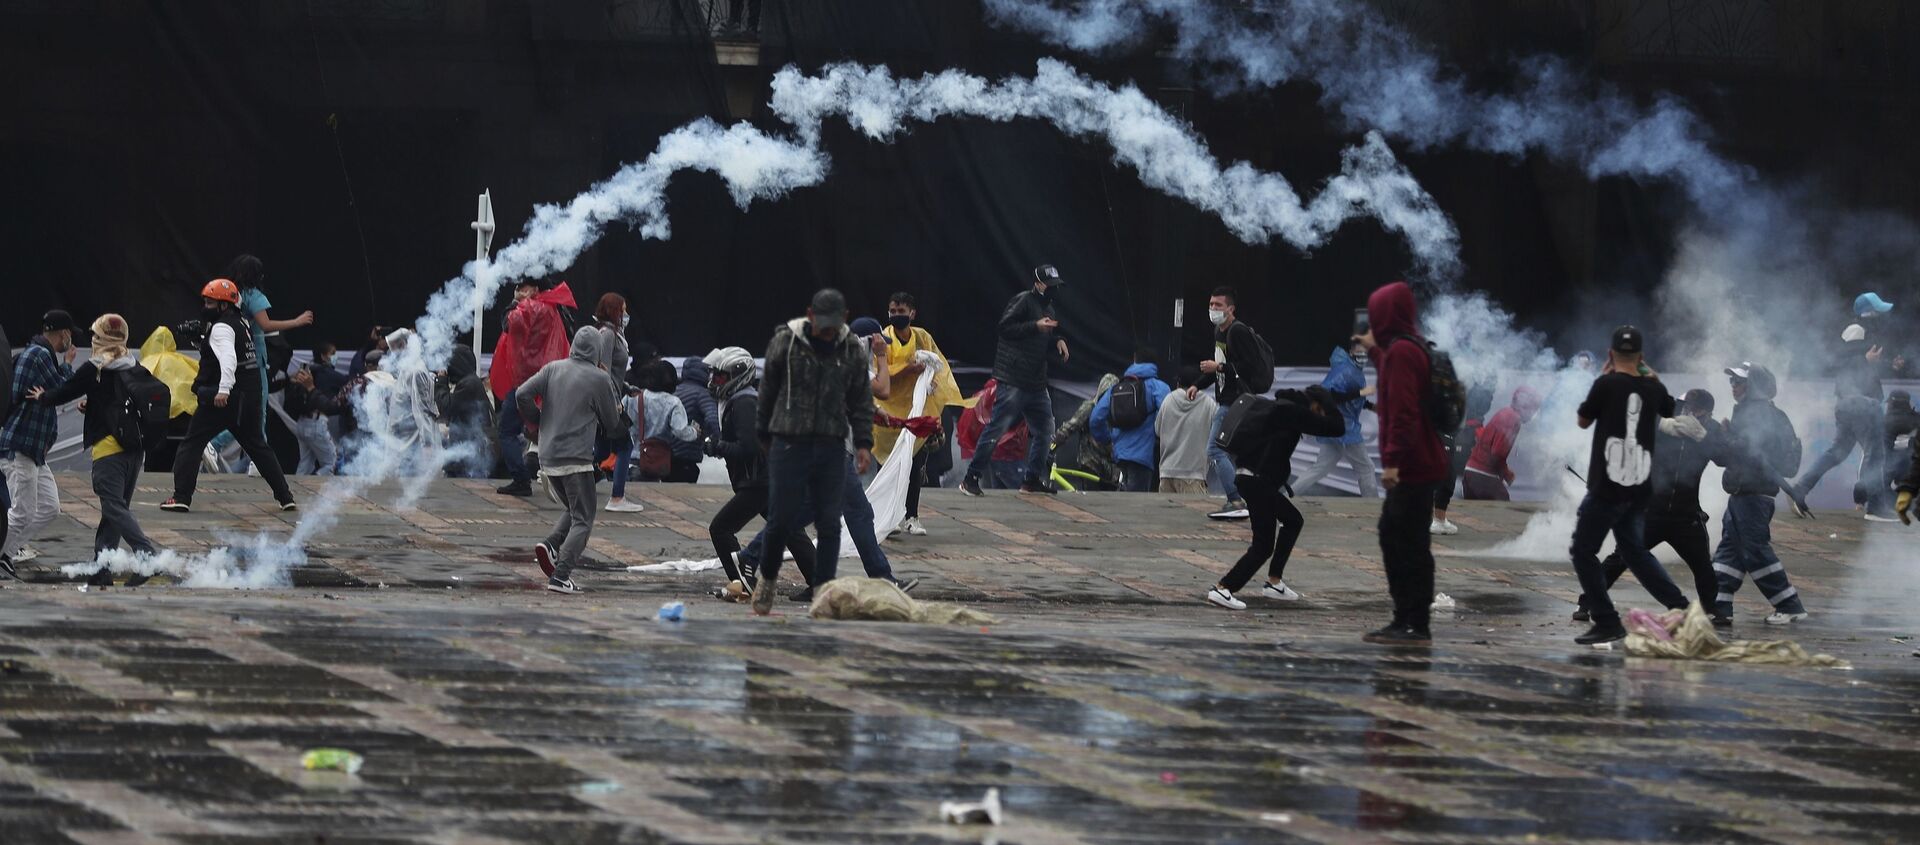 Anti-government protesters return tear gas canisters at the police during clashes in Bogota, Colombia, Wednesday, 5 May 2021. - Sputnik International, 1920, 07.05.2021